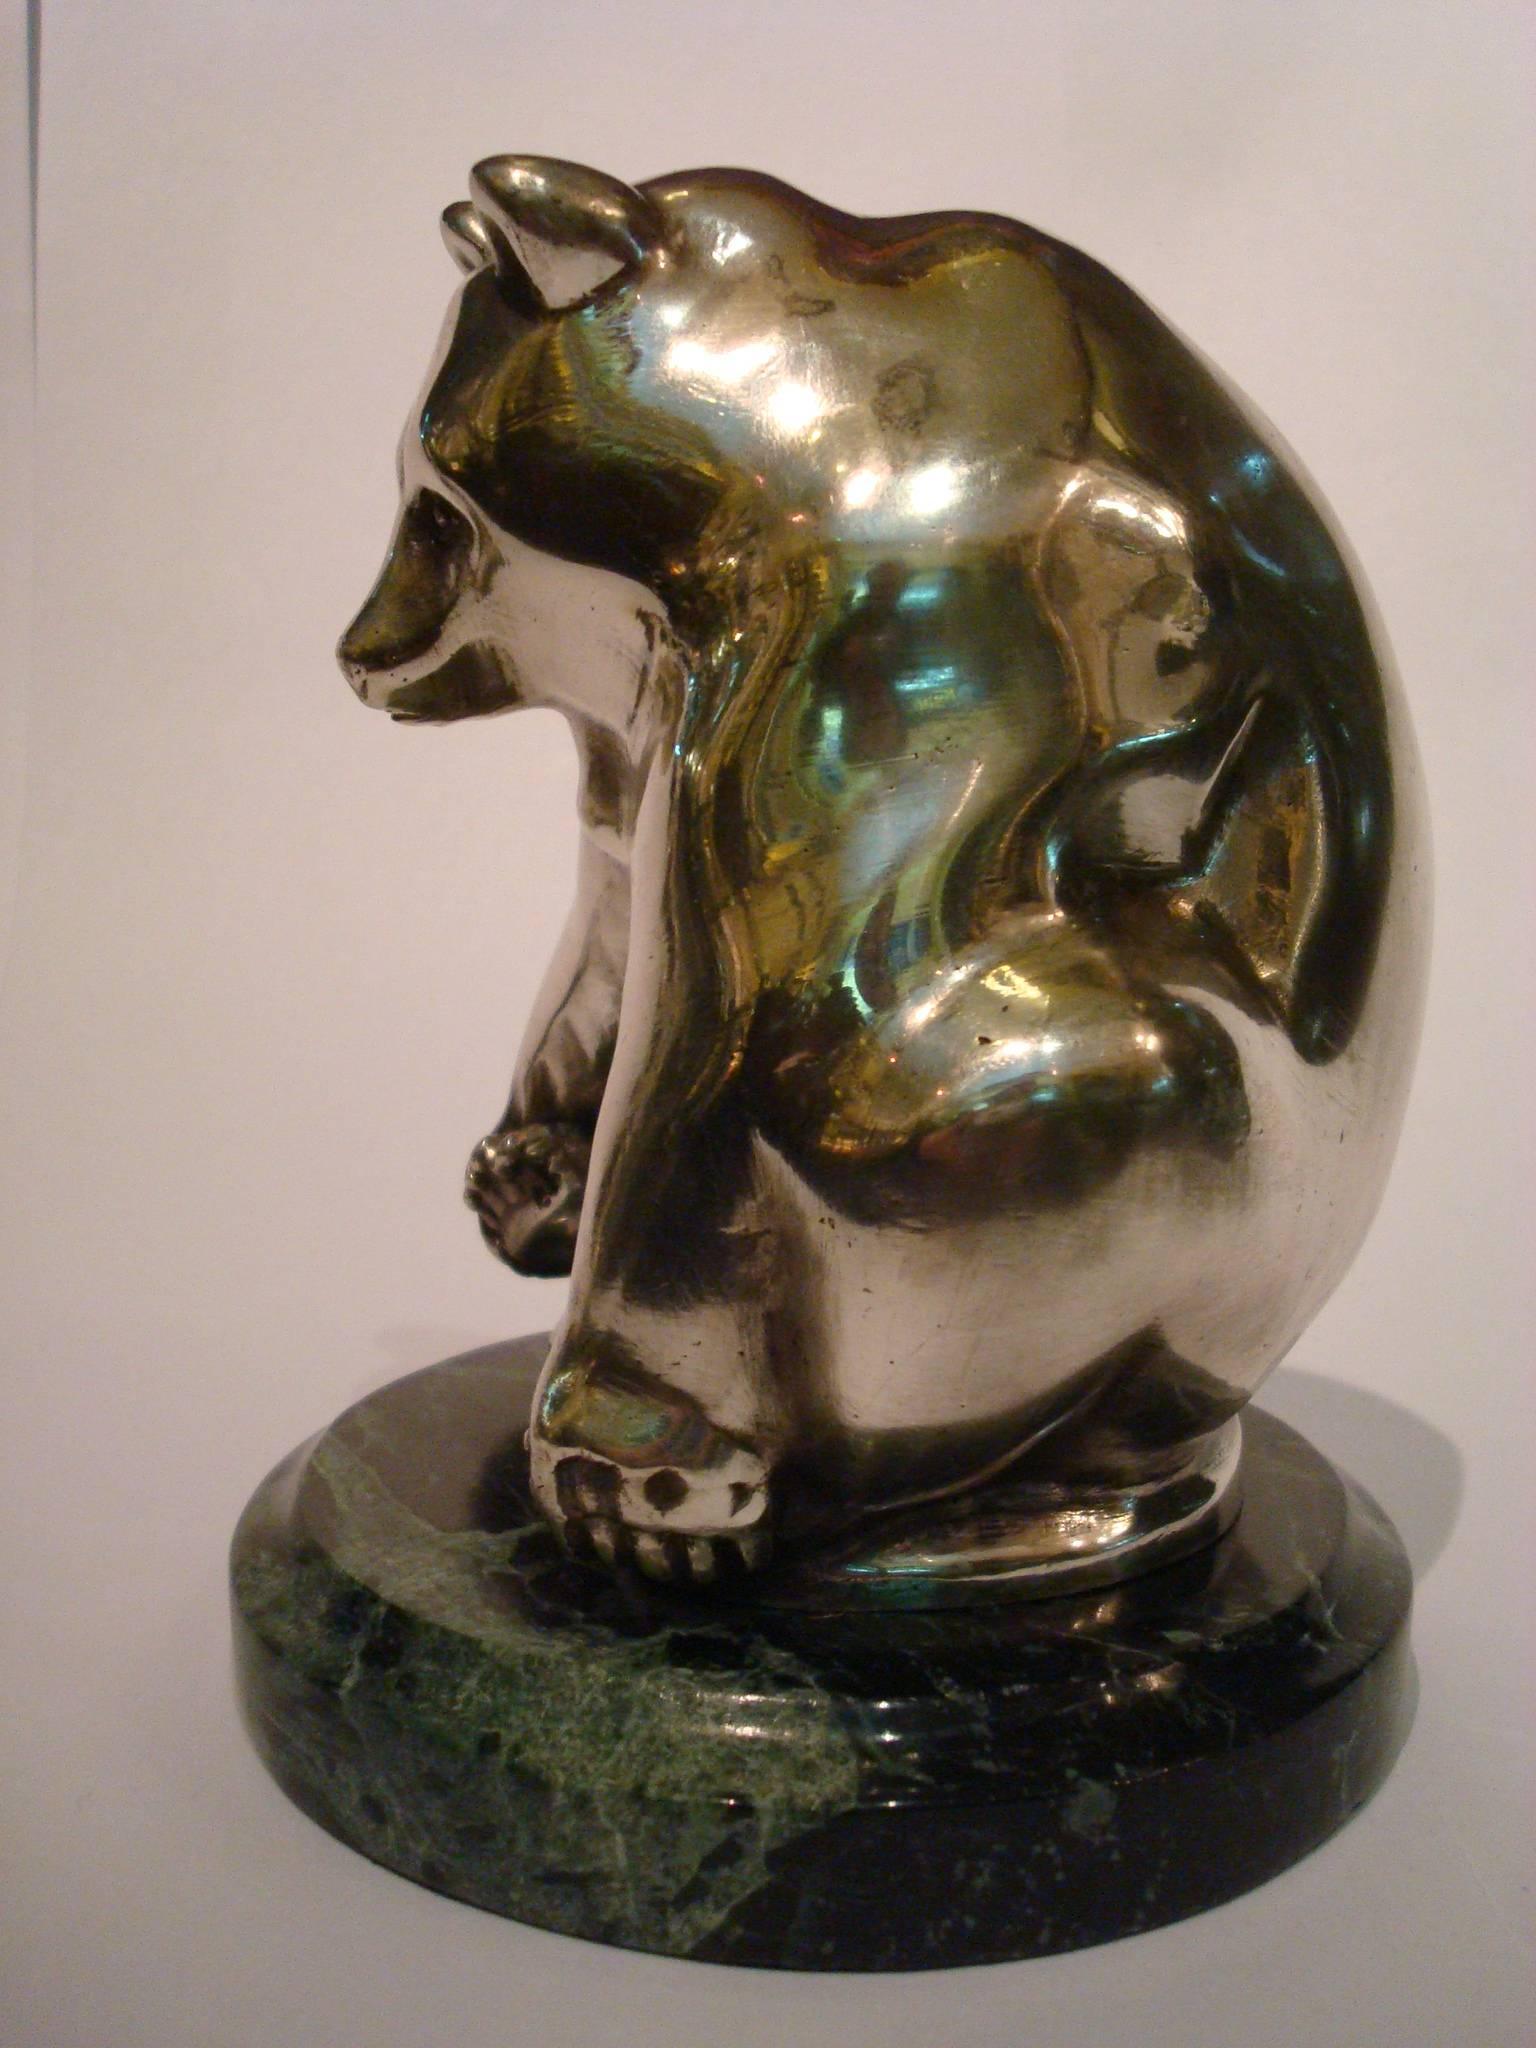 Playing bear art deco bronze paperweight. Mounted over a green alps marble base. signed Ch. Soudant, and foundry marks Susse freress ed. Paris.